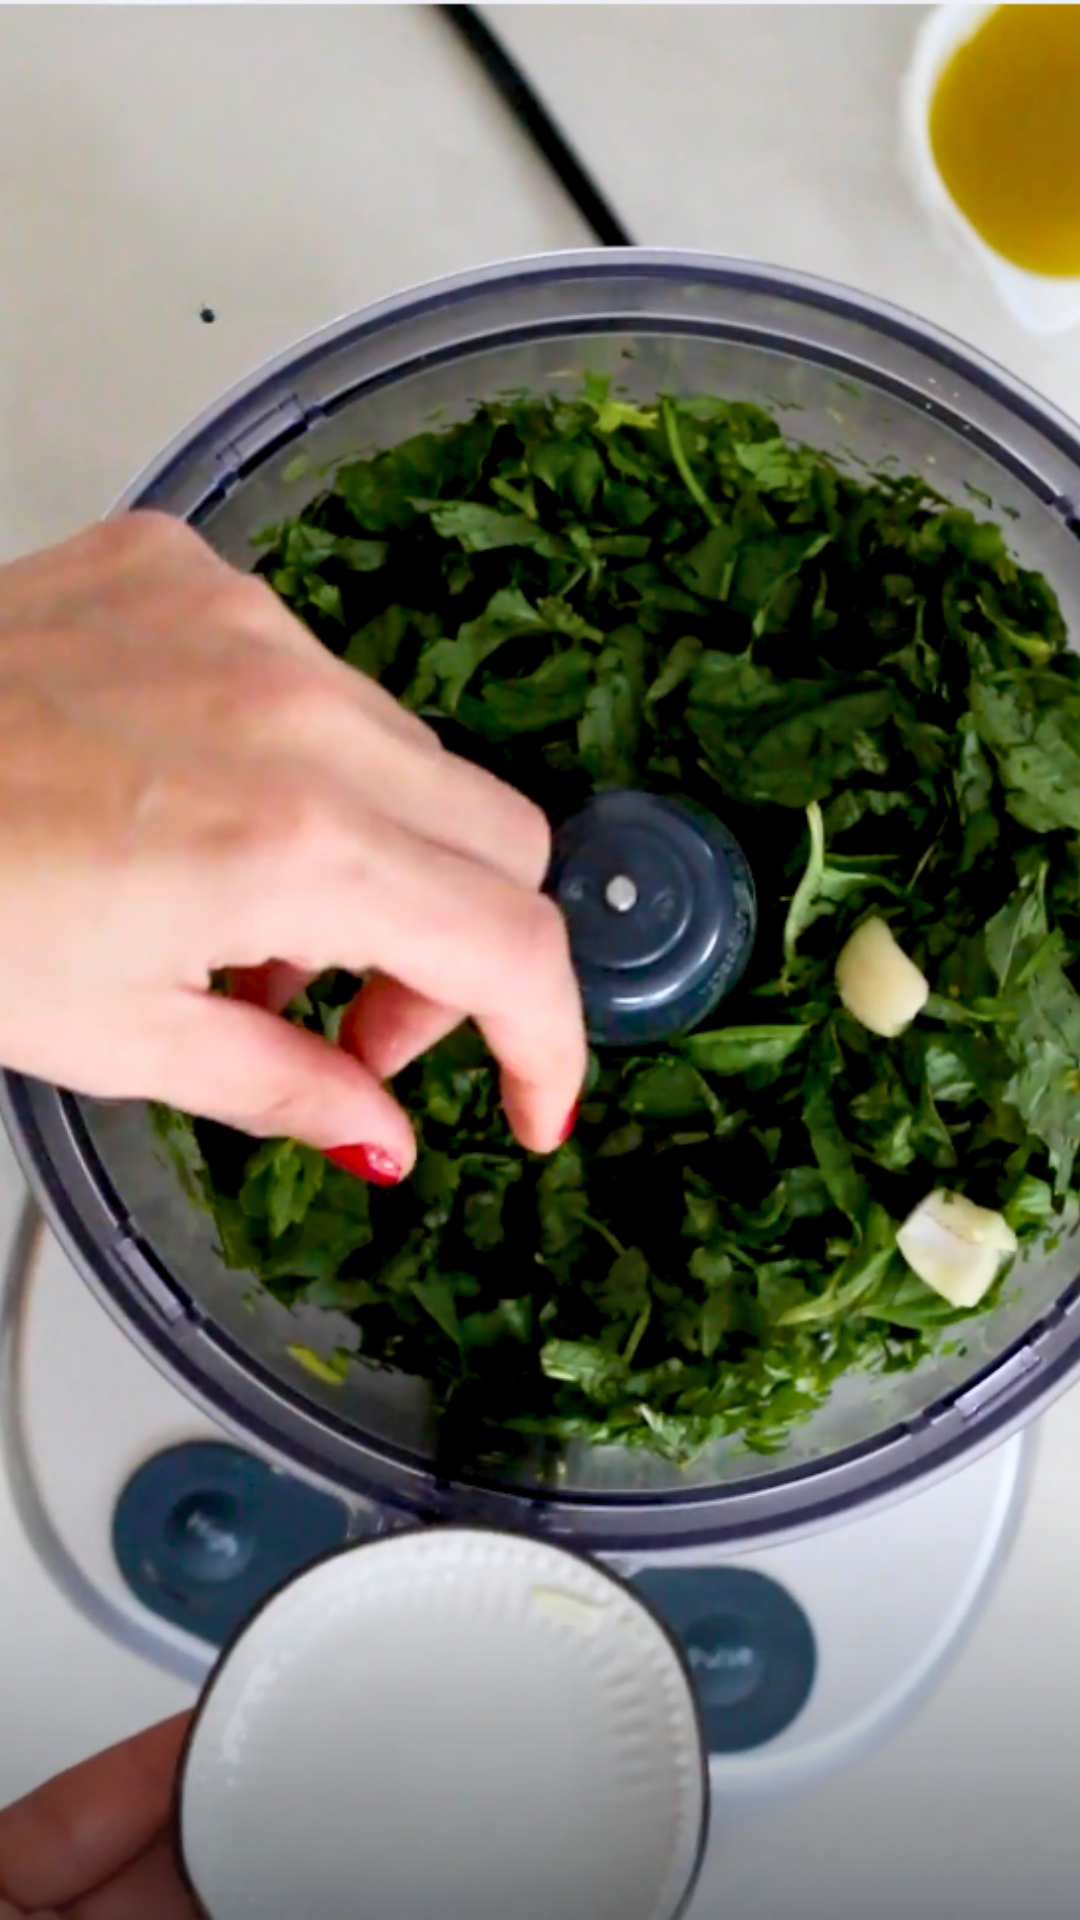 A person is blending greens in a food processor to make vegan pesto.